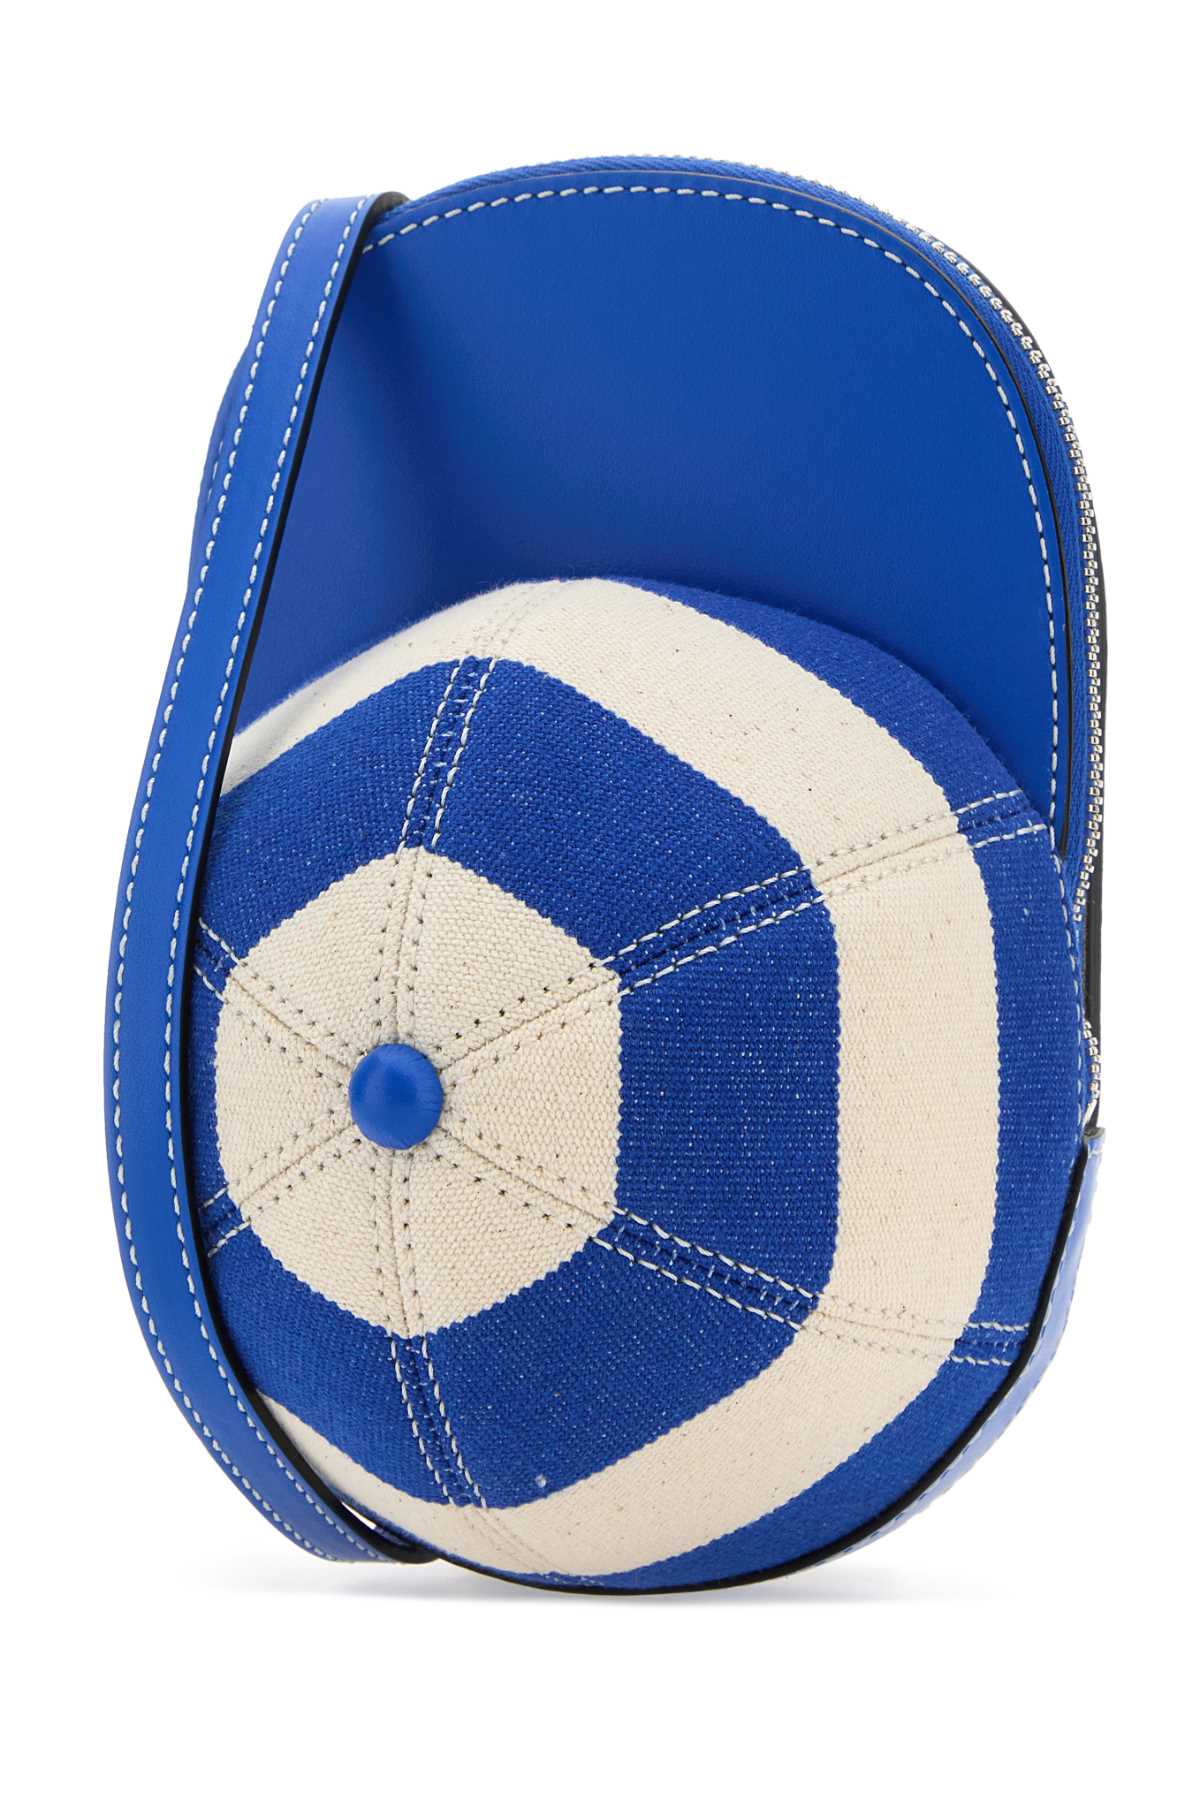 Jw Anderson Embroidered Canvas And Leather Midi Cap Crossbody Bag In Bluewhite